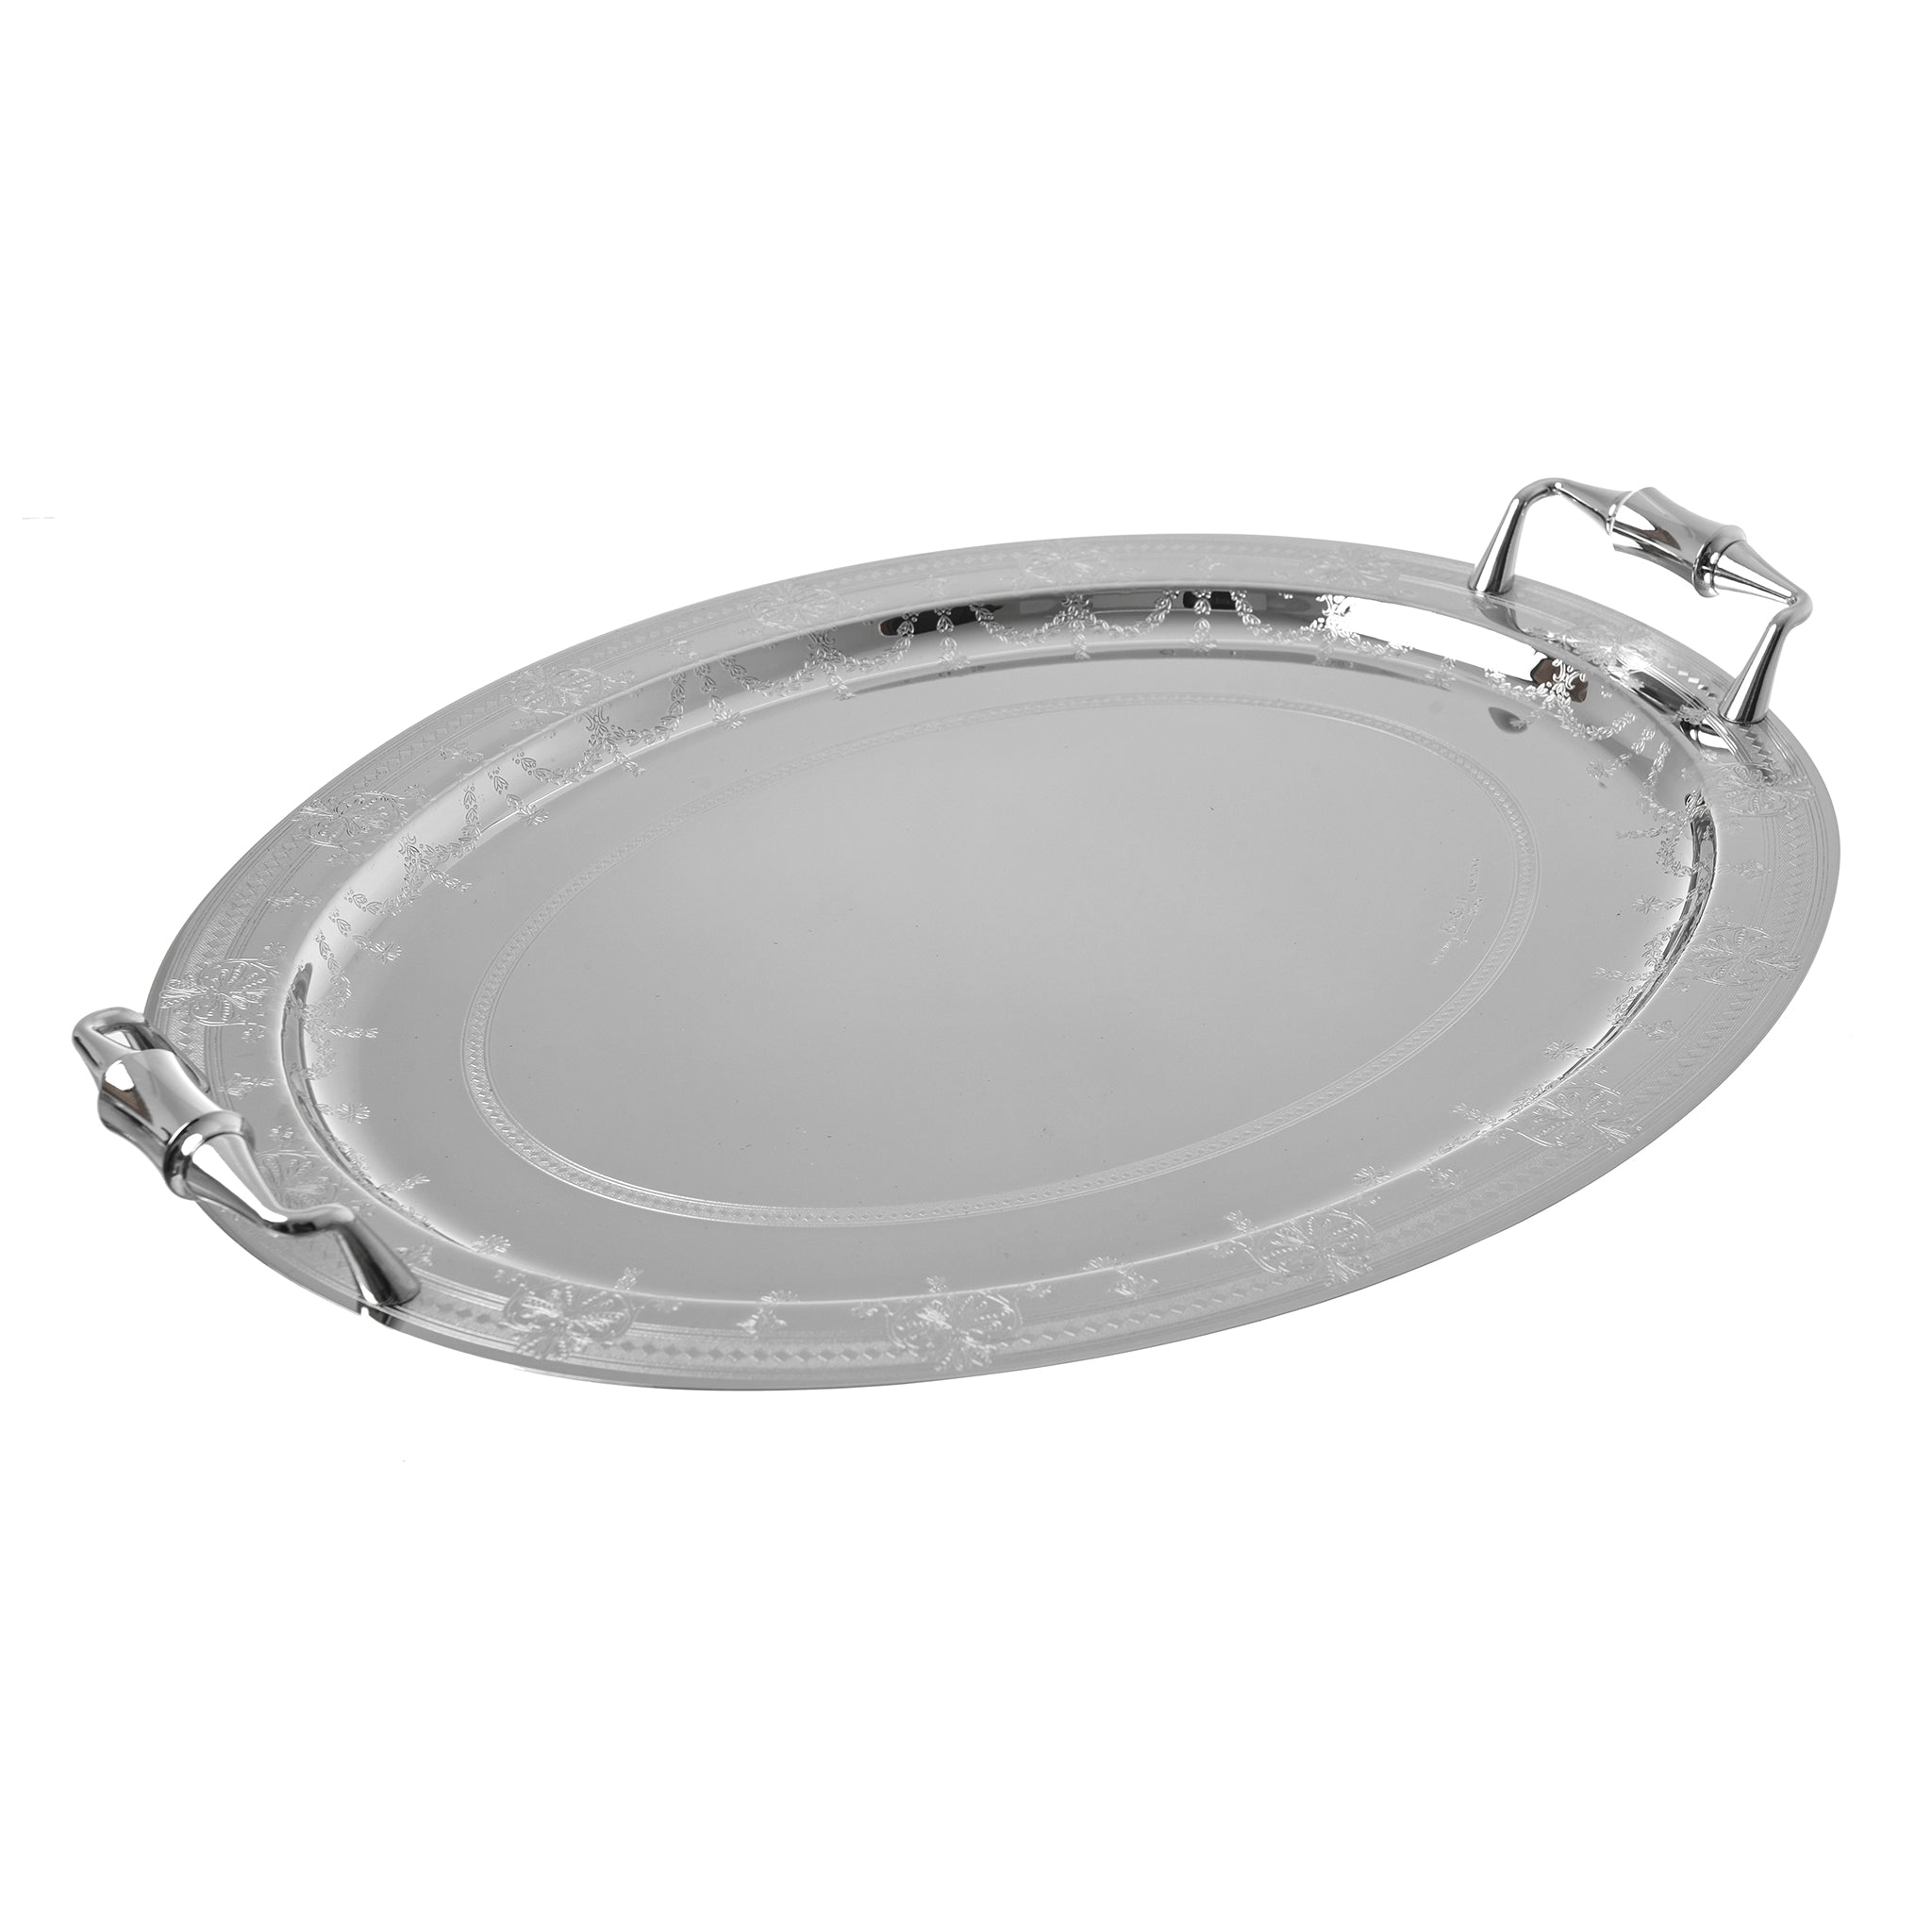 Elegant Gioiel - Oval Tray with Handles - Stainless Steel 18/10 - 48cm - 75000465